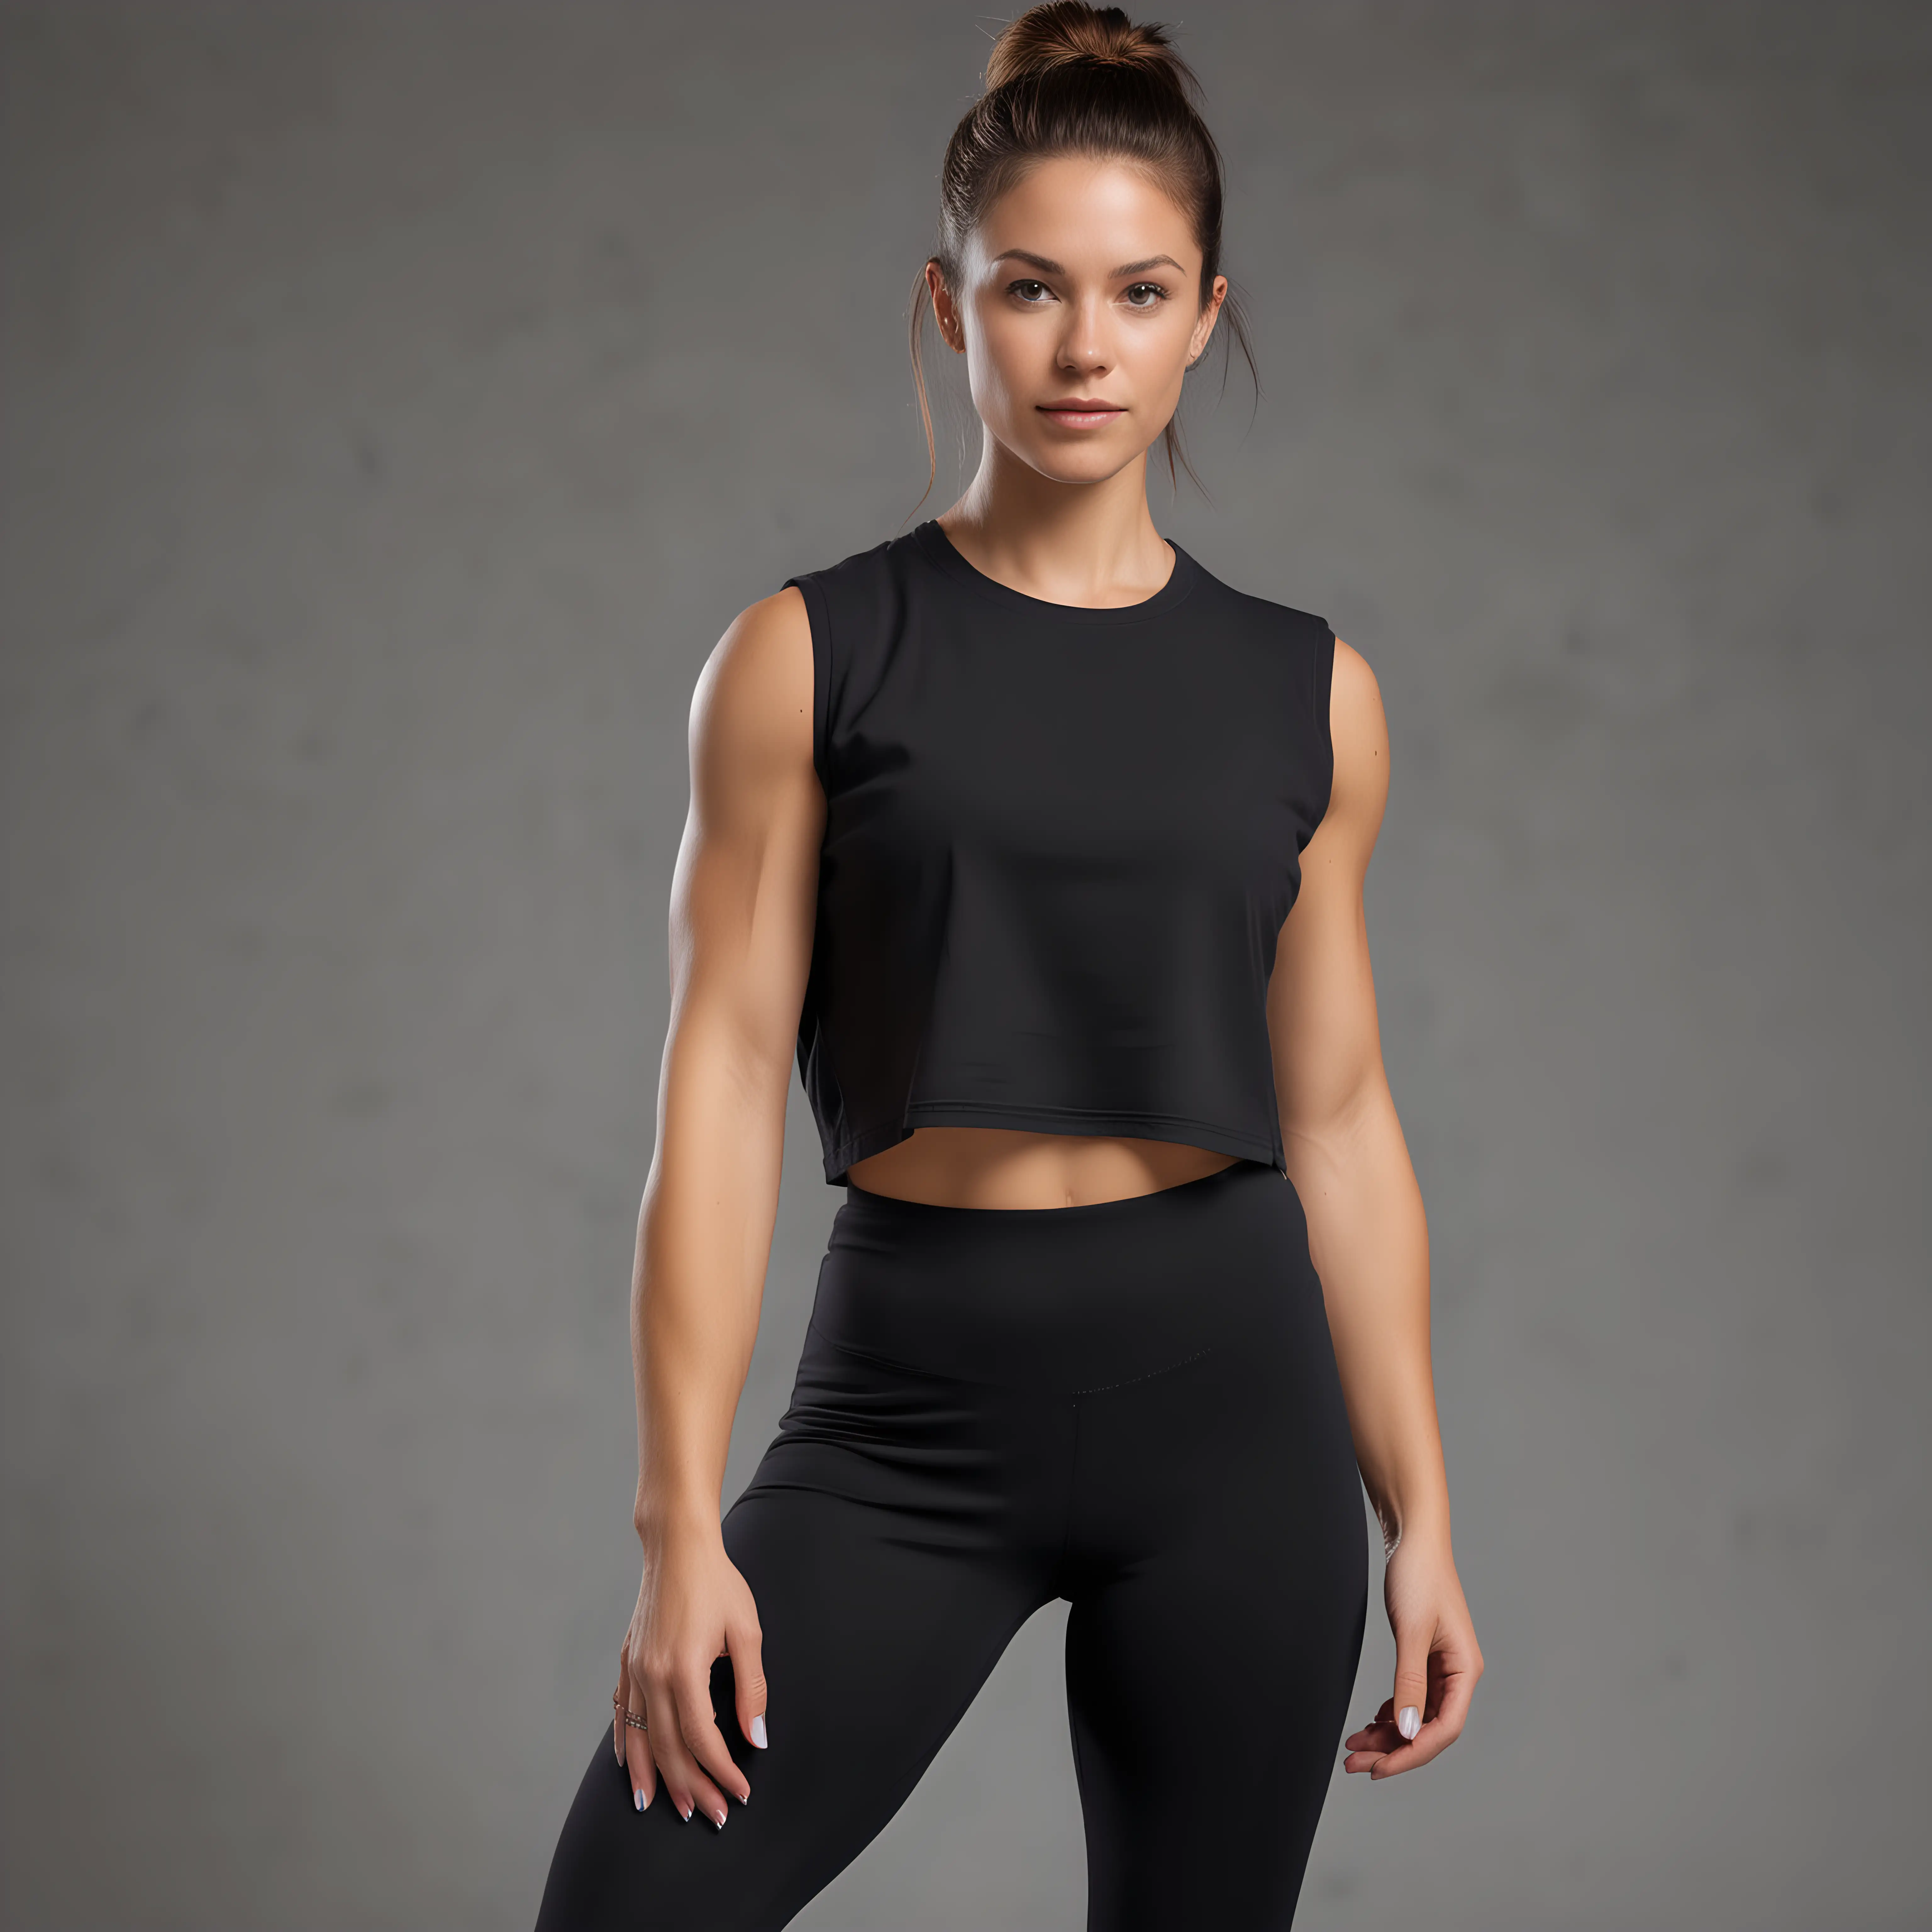 generate image of crossfit  women wearing loose fit black crew neck crop cotton sleveless tshirt from 2 angles 